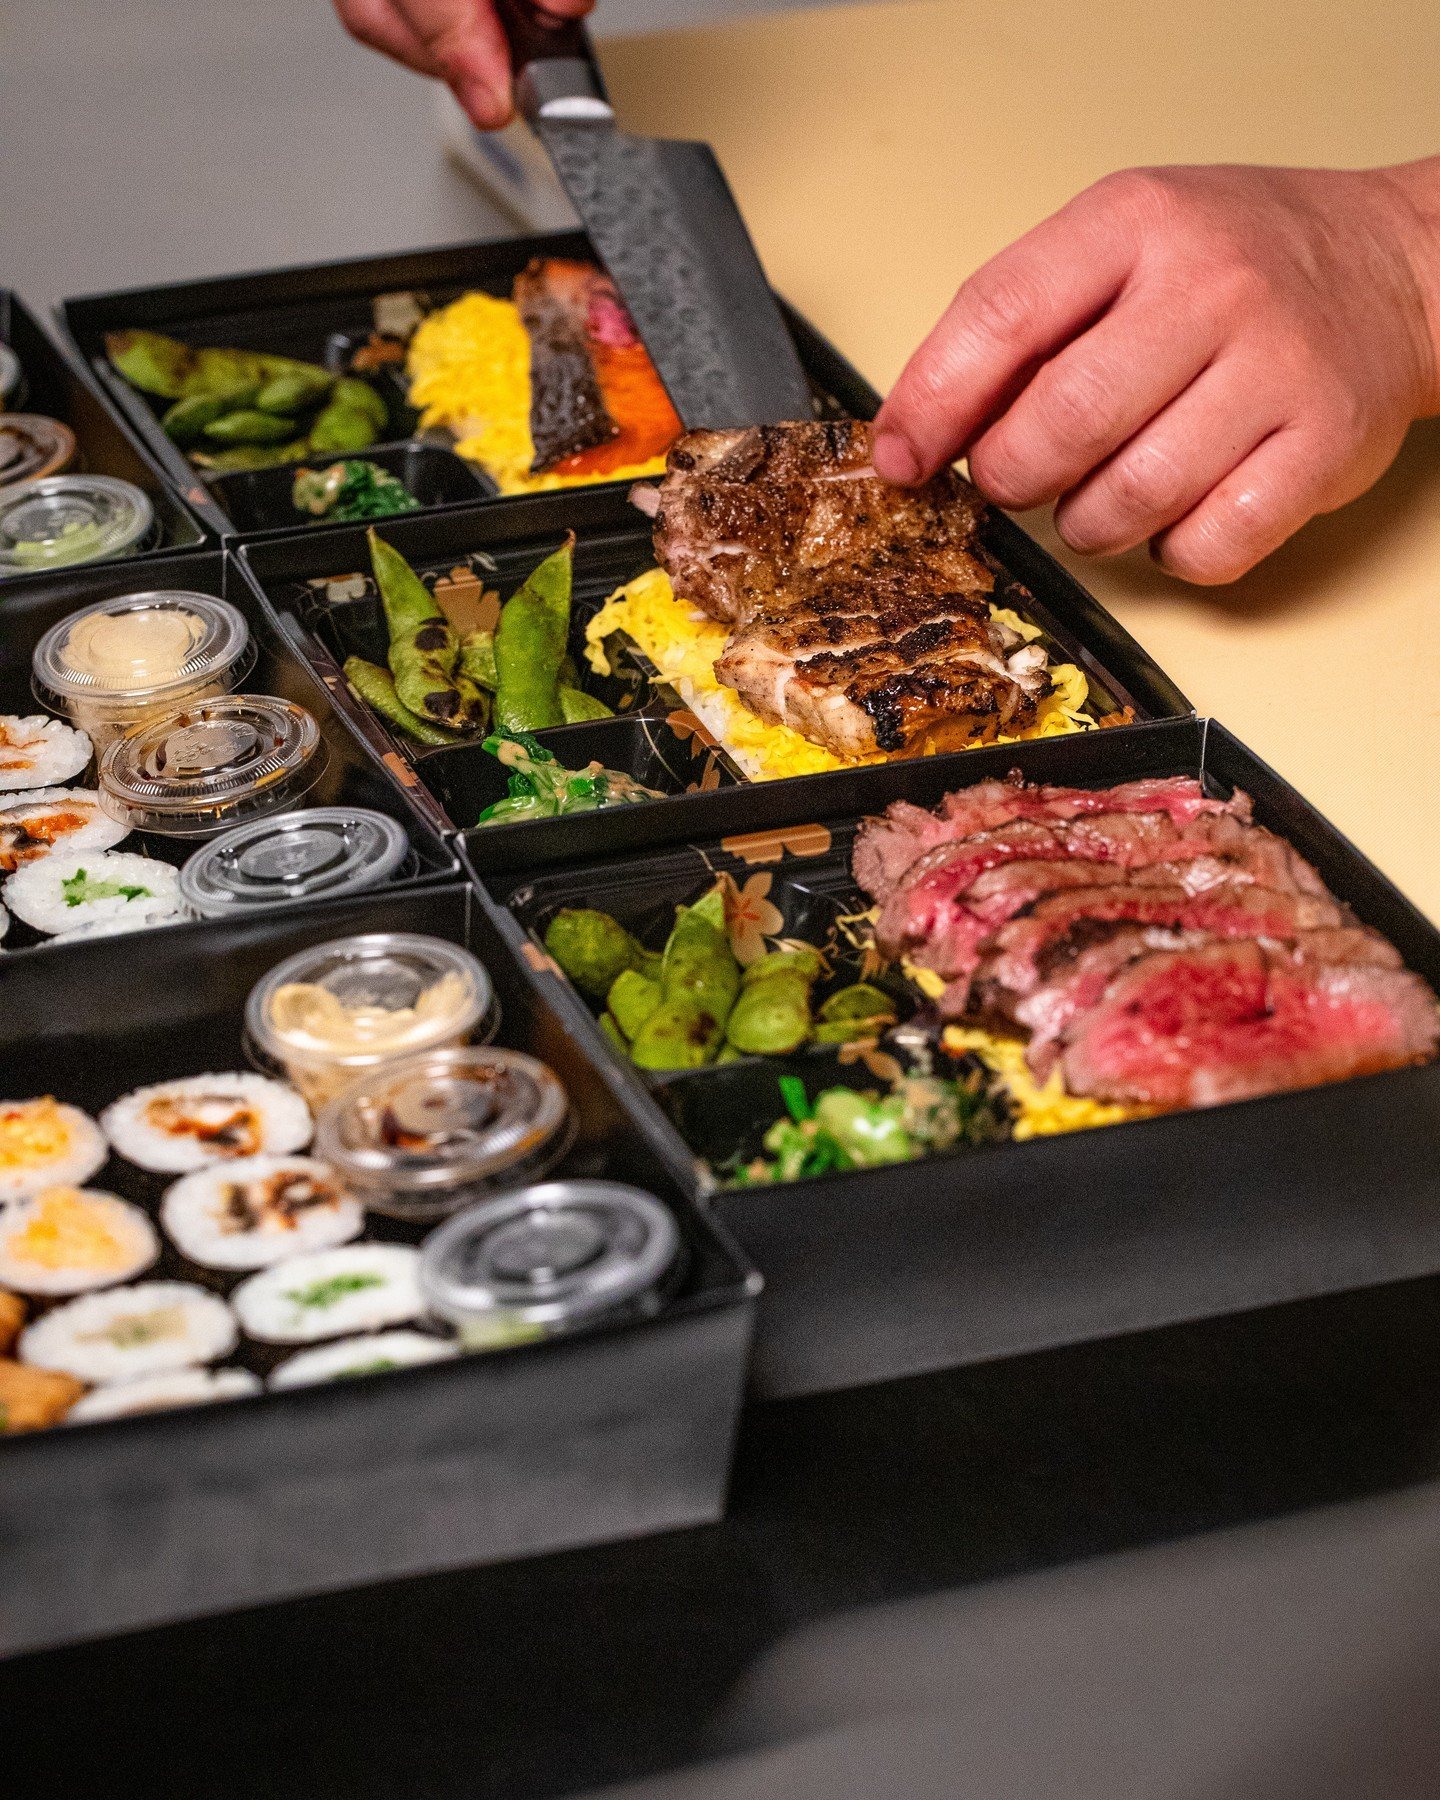 Hello Nori R+D Kitchen (@clubkitchen.ca) is excited to share a fresh selection of lunch bento boxes for a LIMITED time. These options will be available starting today until the end of May between 11 AM and 4 PM. ⁠
⁠
Select between:⁠
1. Charcoal Grill